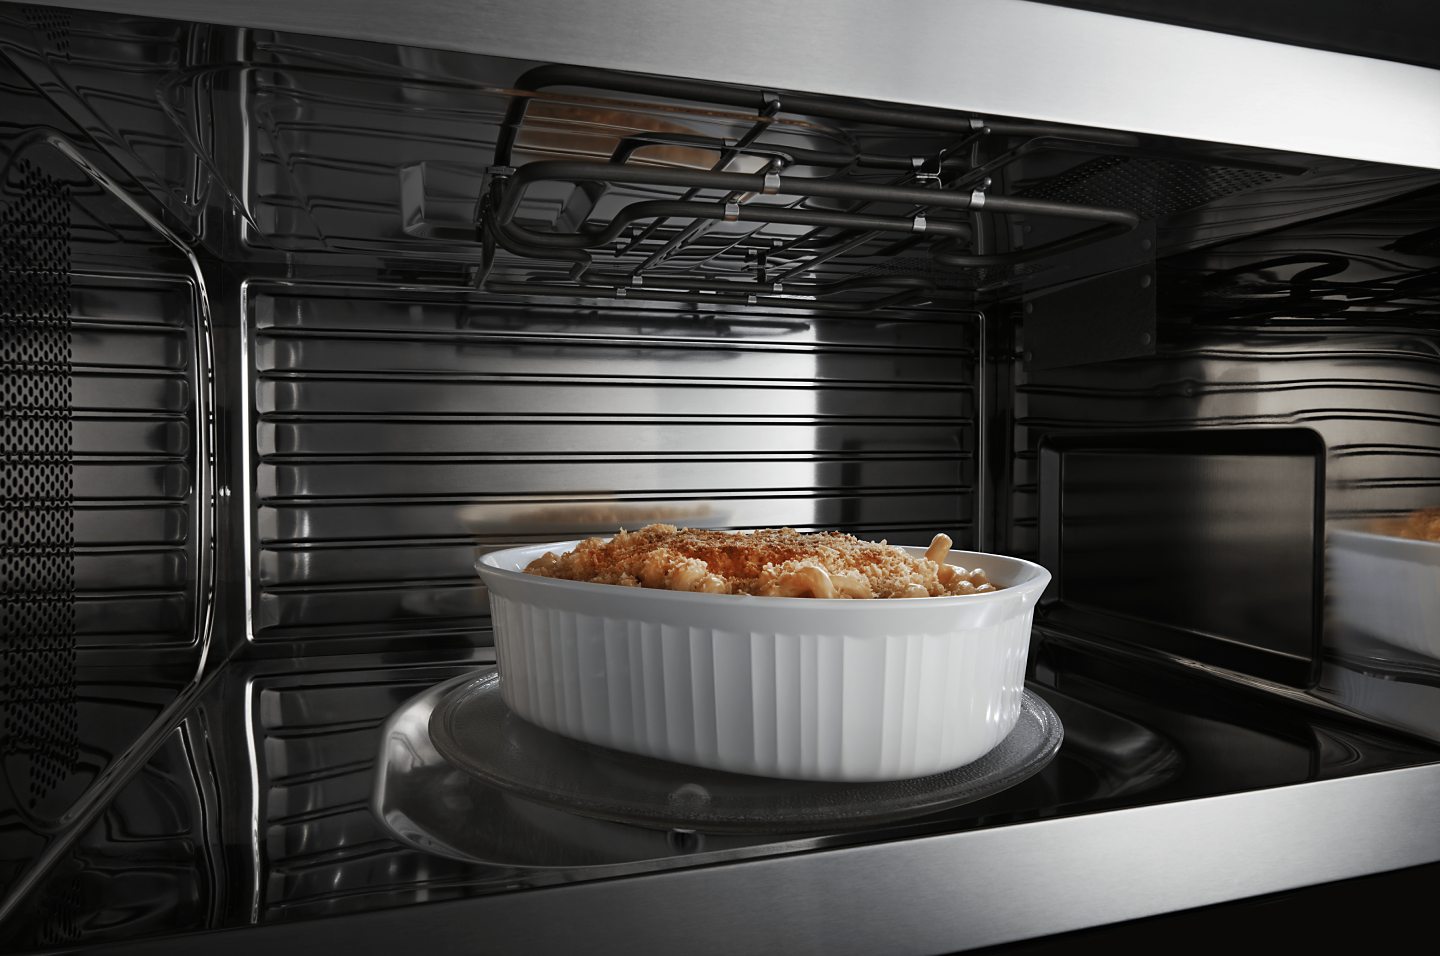 A perfectly cooked pasta dish in a microwave